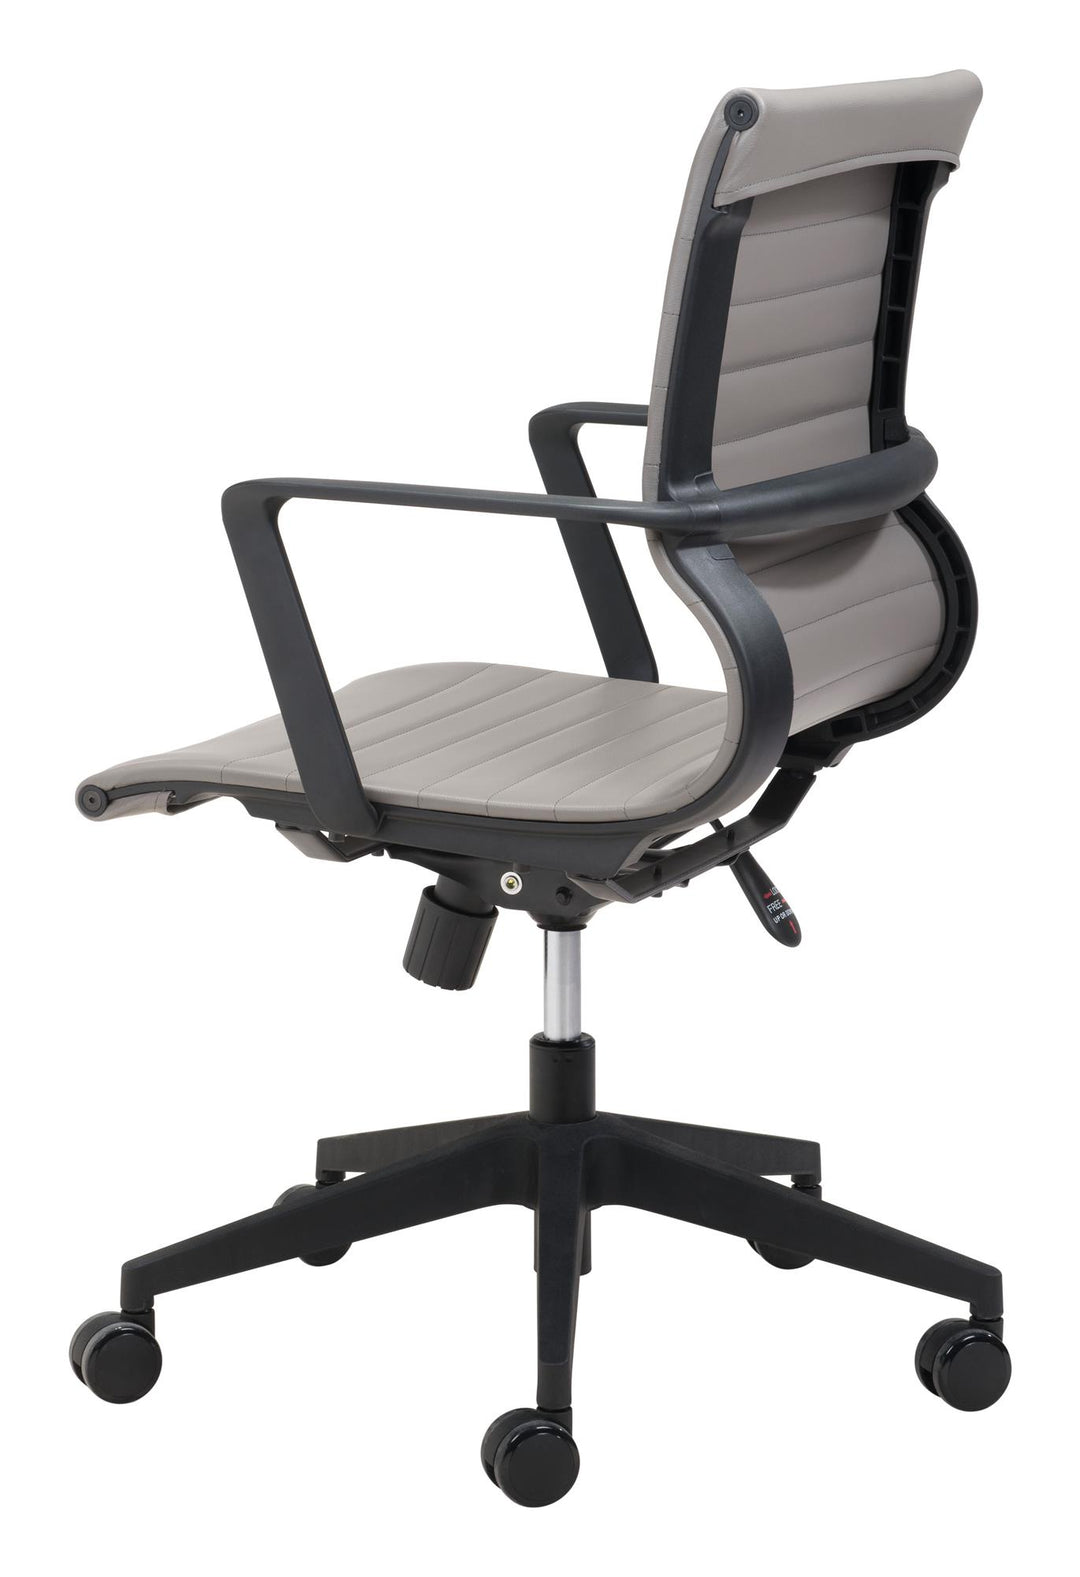 Office Chair with polypropylene frame - Gray